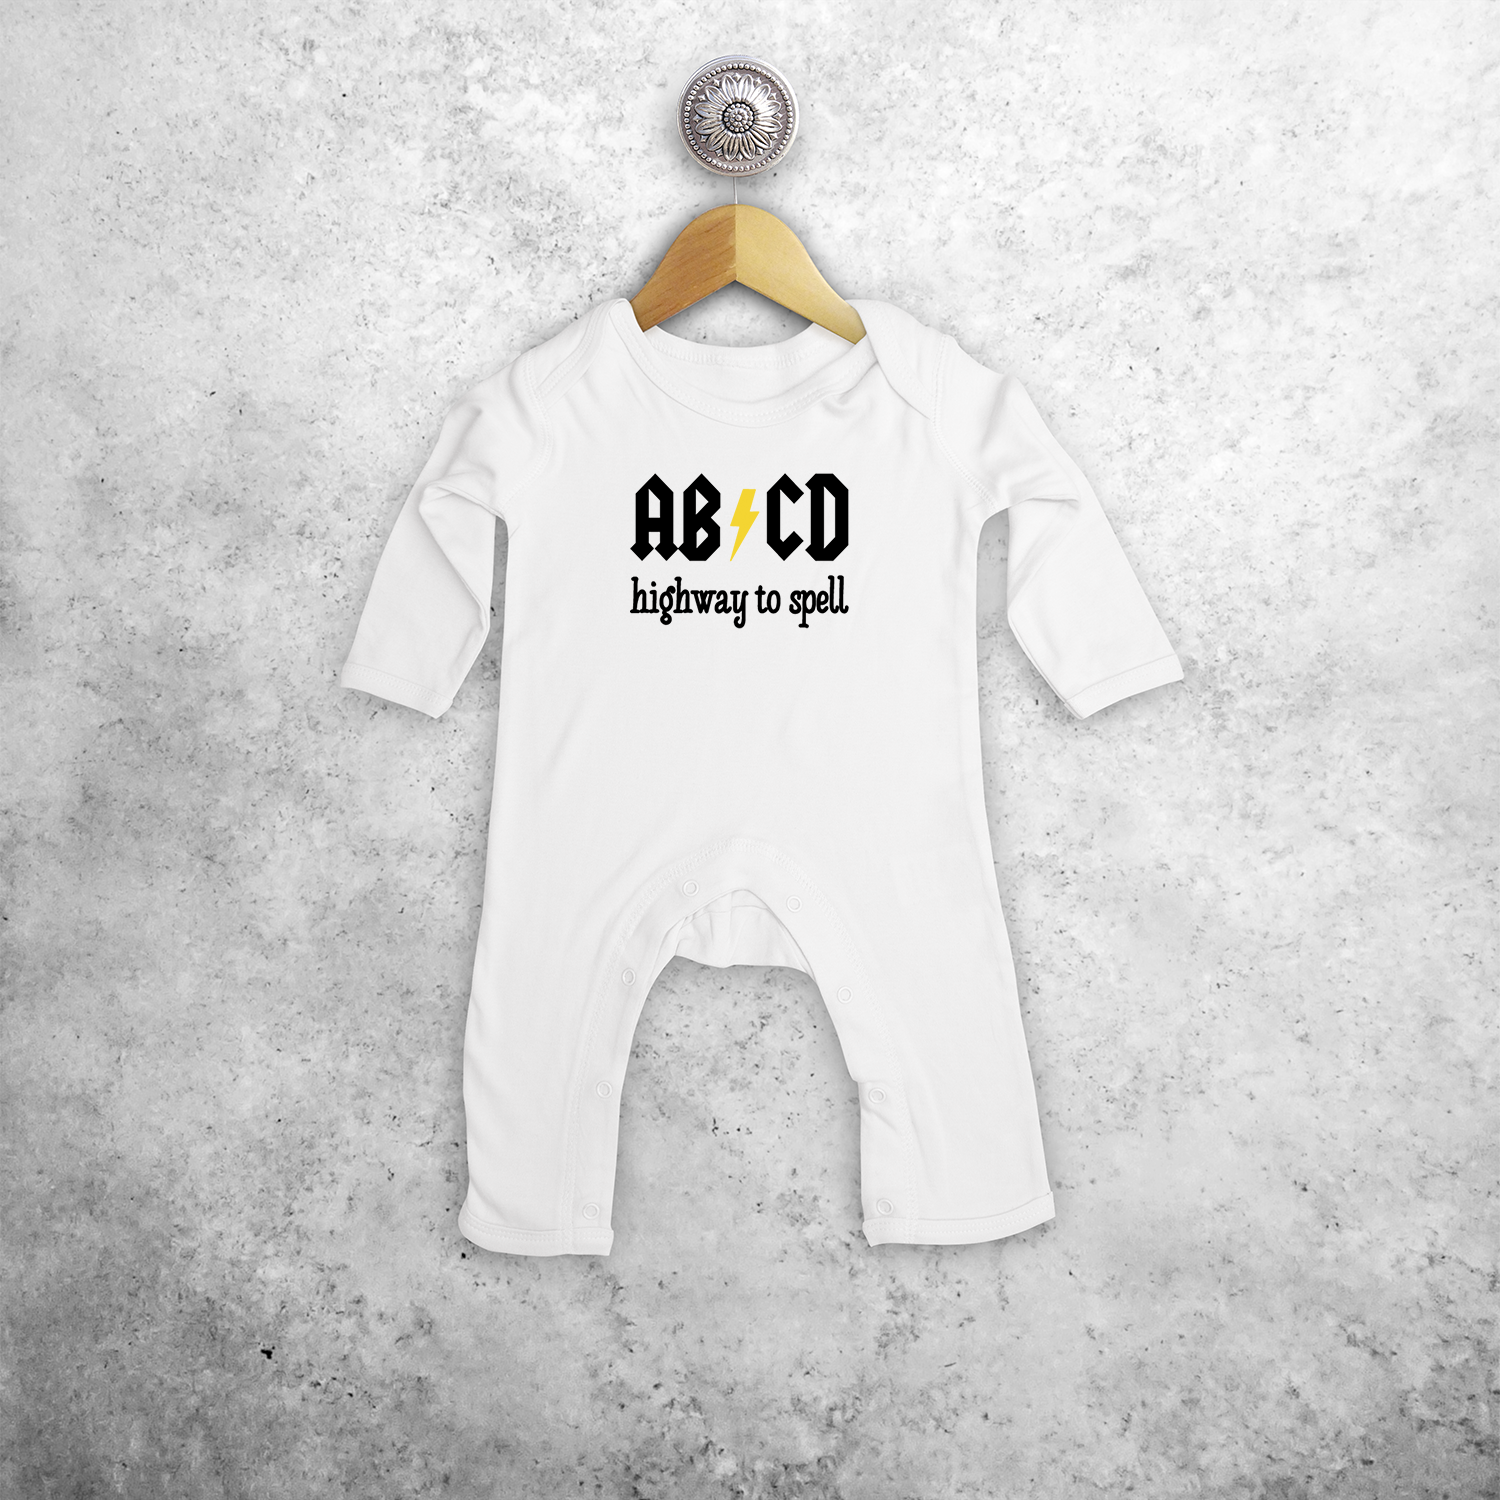 'ABCD - Highway to spell' baby romper